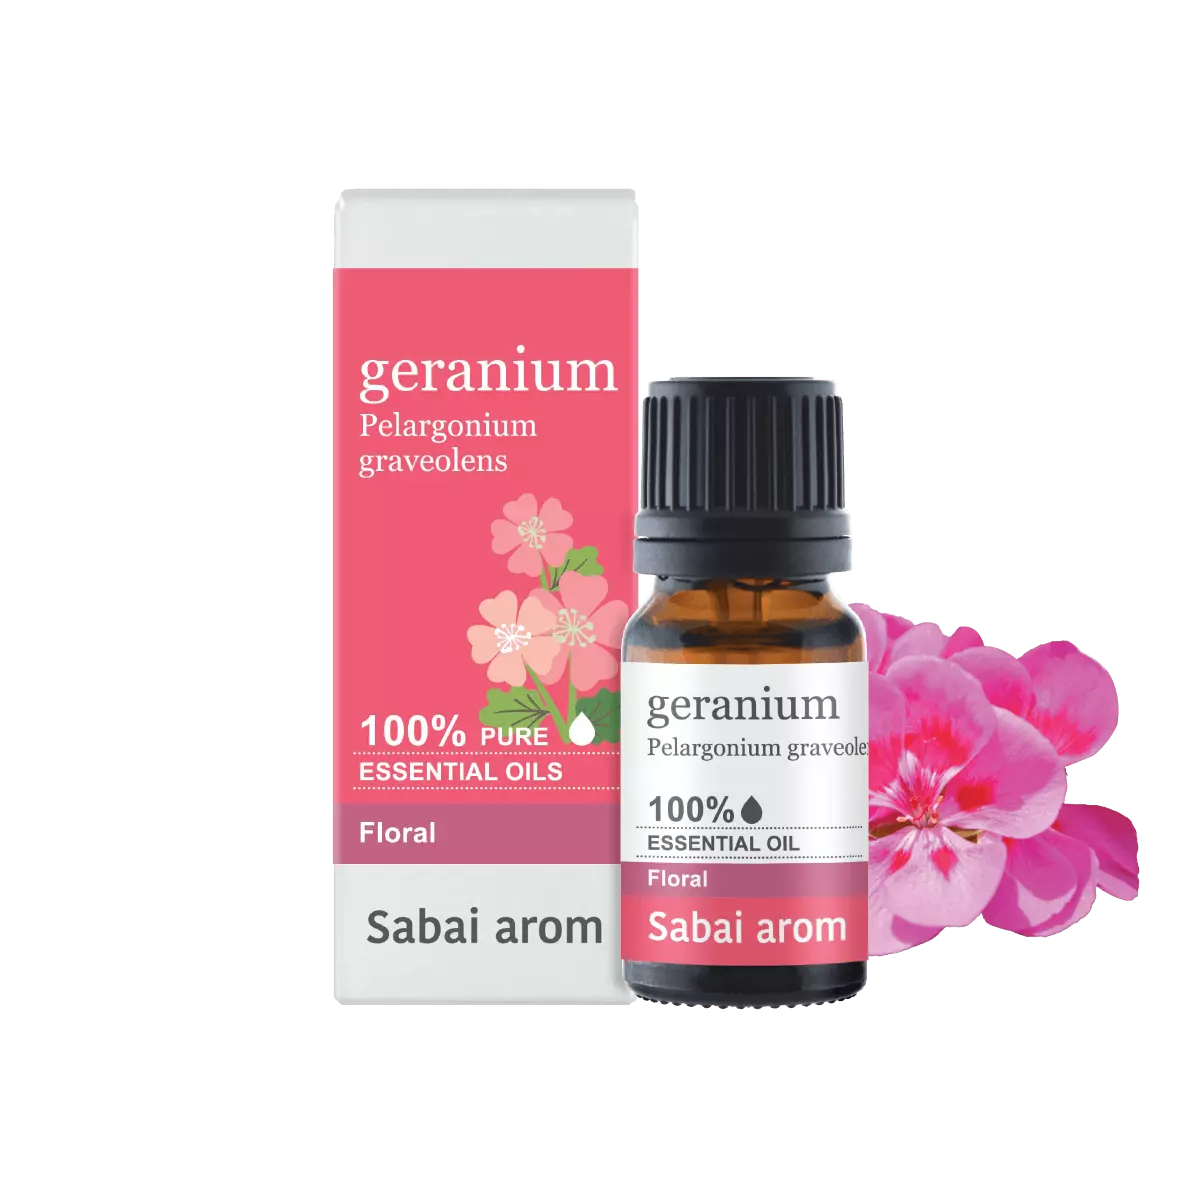 essential oil geranium <h2>100% Pure Essential Oil</h2> <em><strong>Pelargonium Graveolens</strong></em> <strong>Source : </strong>Egypt The scent of Geranium can be described as bold and thick floral with a hint of herbaceous rose lingering to it. It is a highly beneficial oil that recovers us from anxiety to a place of calm and well composed. Geranium is helpful with soothing broken heart. It helps us free our minds from the bruised memory and inspires us to understand the good intentions of people around. Physically, Geranium oil can be used to treat dizziness, hangover, asthma, menopause effects. It can also be applied with carrier oil as cellulite fighter, while improving circulation system. It is even known natural insect repellent that effectively wards off insects and mosquitos. <strong>Scent : </strong>Sweet, floral and fruity. <strong>Family : </strong>Floral <strong>Note : </strong>Middle